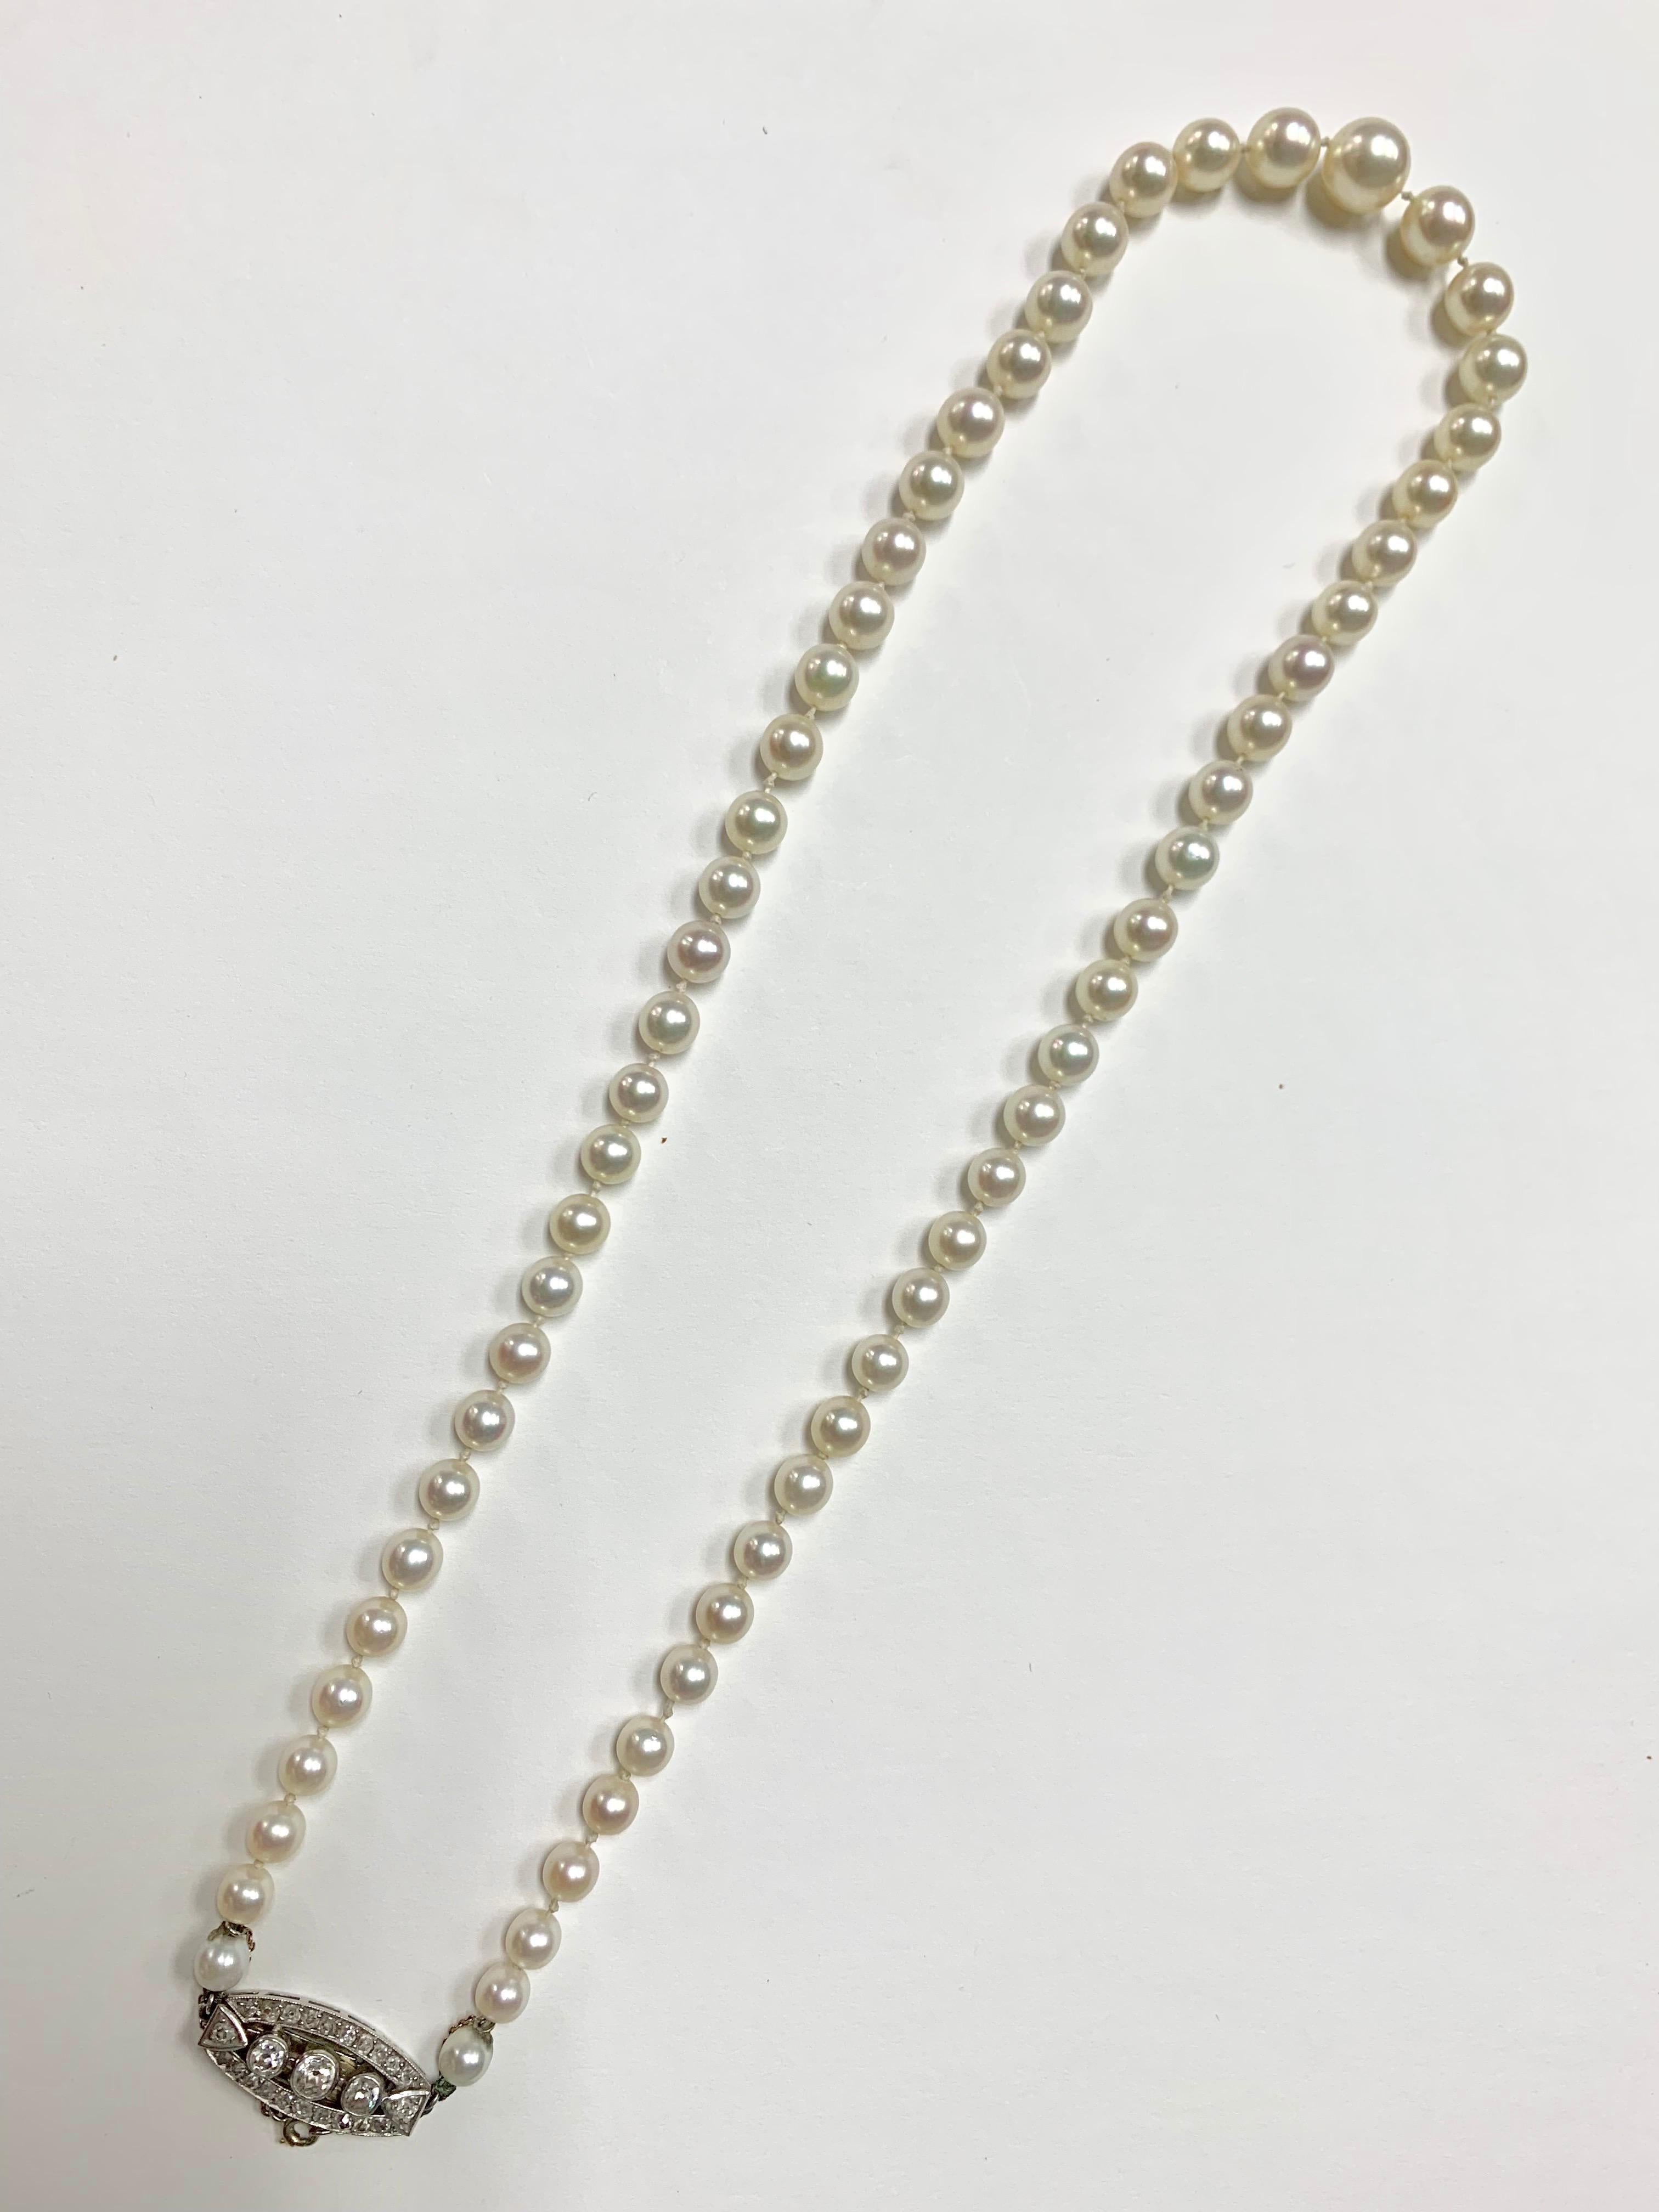 1920 Akoya Cultured Pearl and diamond necklace in platinum. 
Length- 19 inches 
Not pearls - 61 drilled pearls. 
61 pearls are drilled in a graduated necklace with a white metal clasp ( platinum ) set with numerous old european brilliants and single